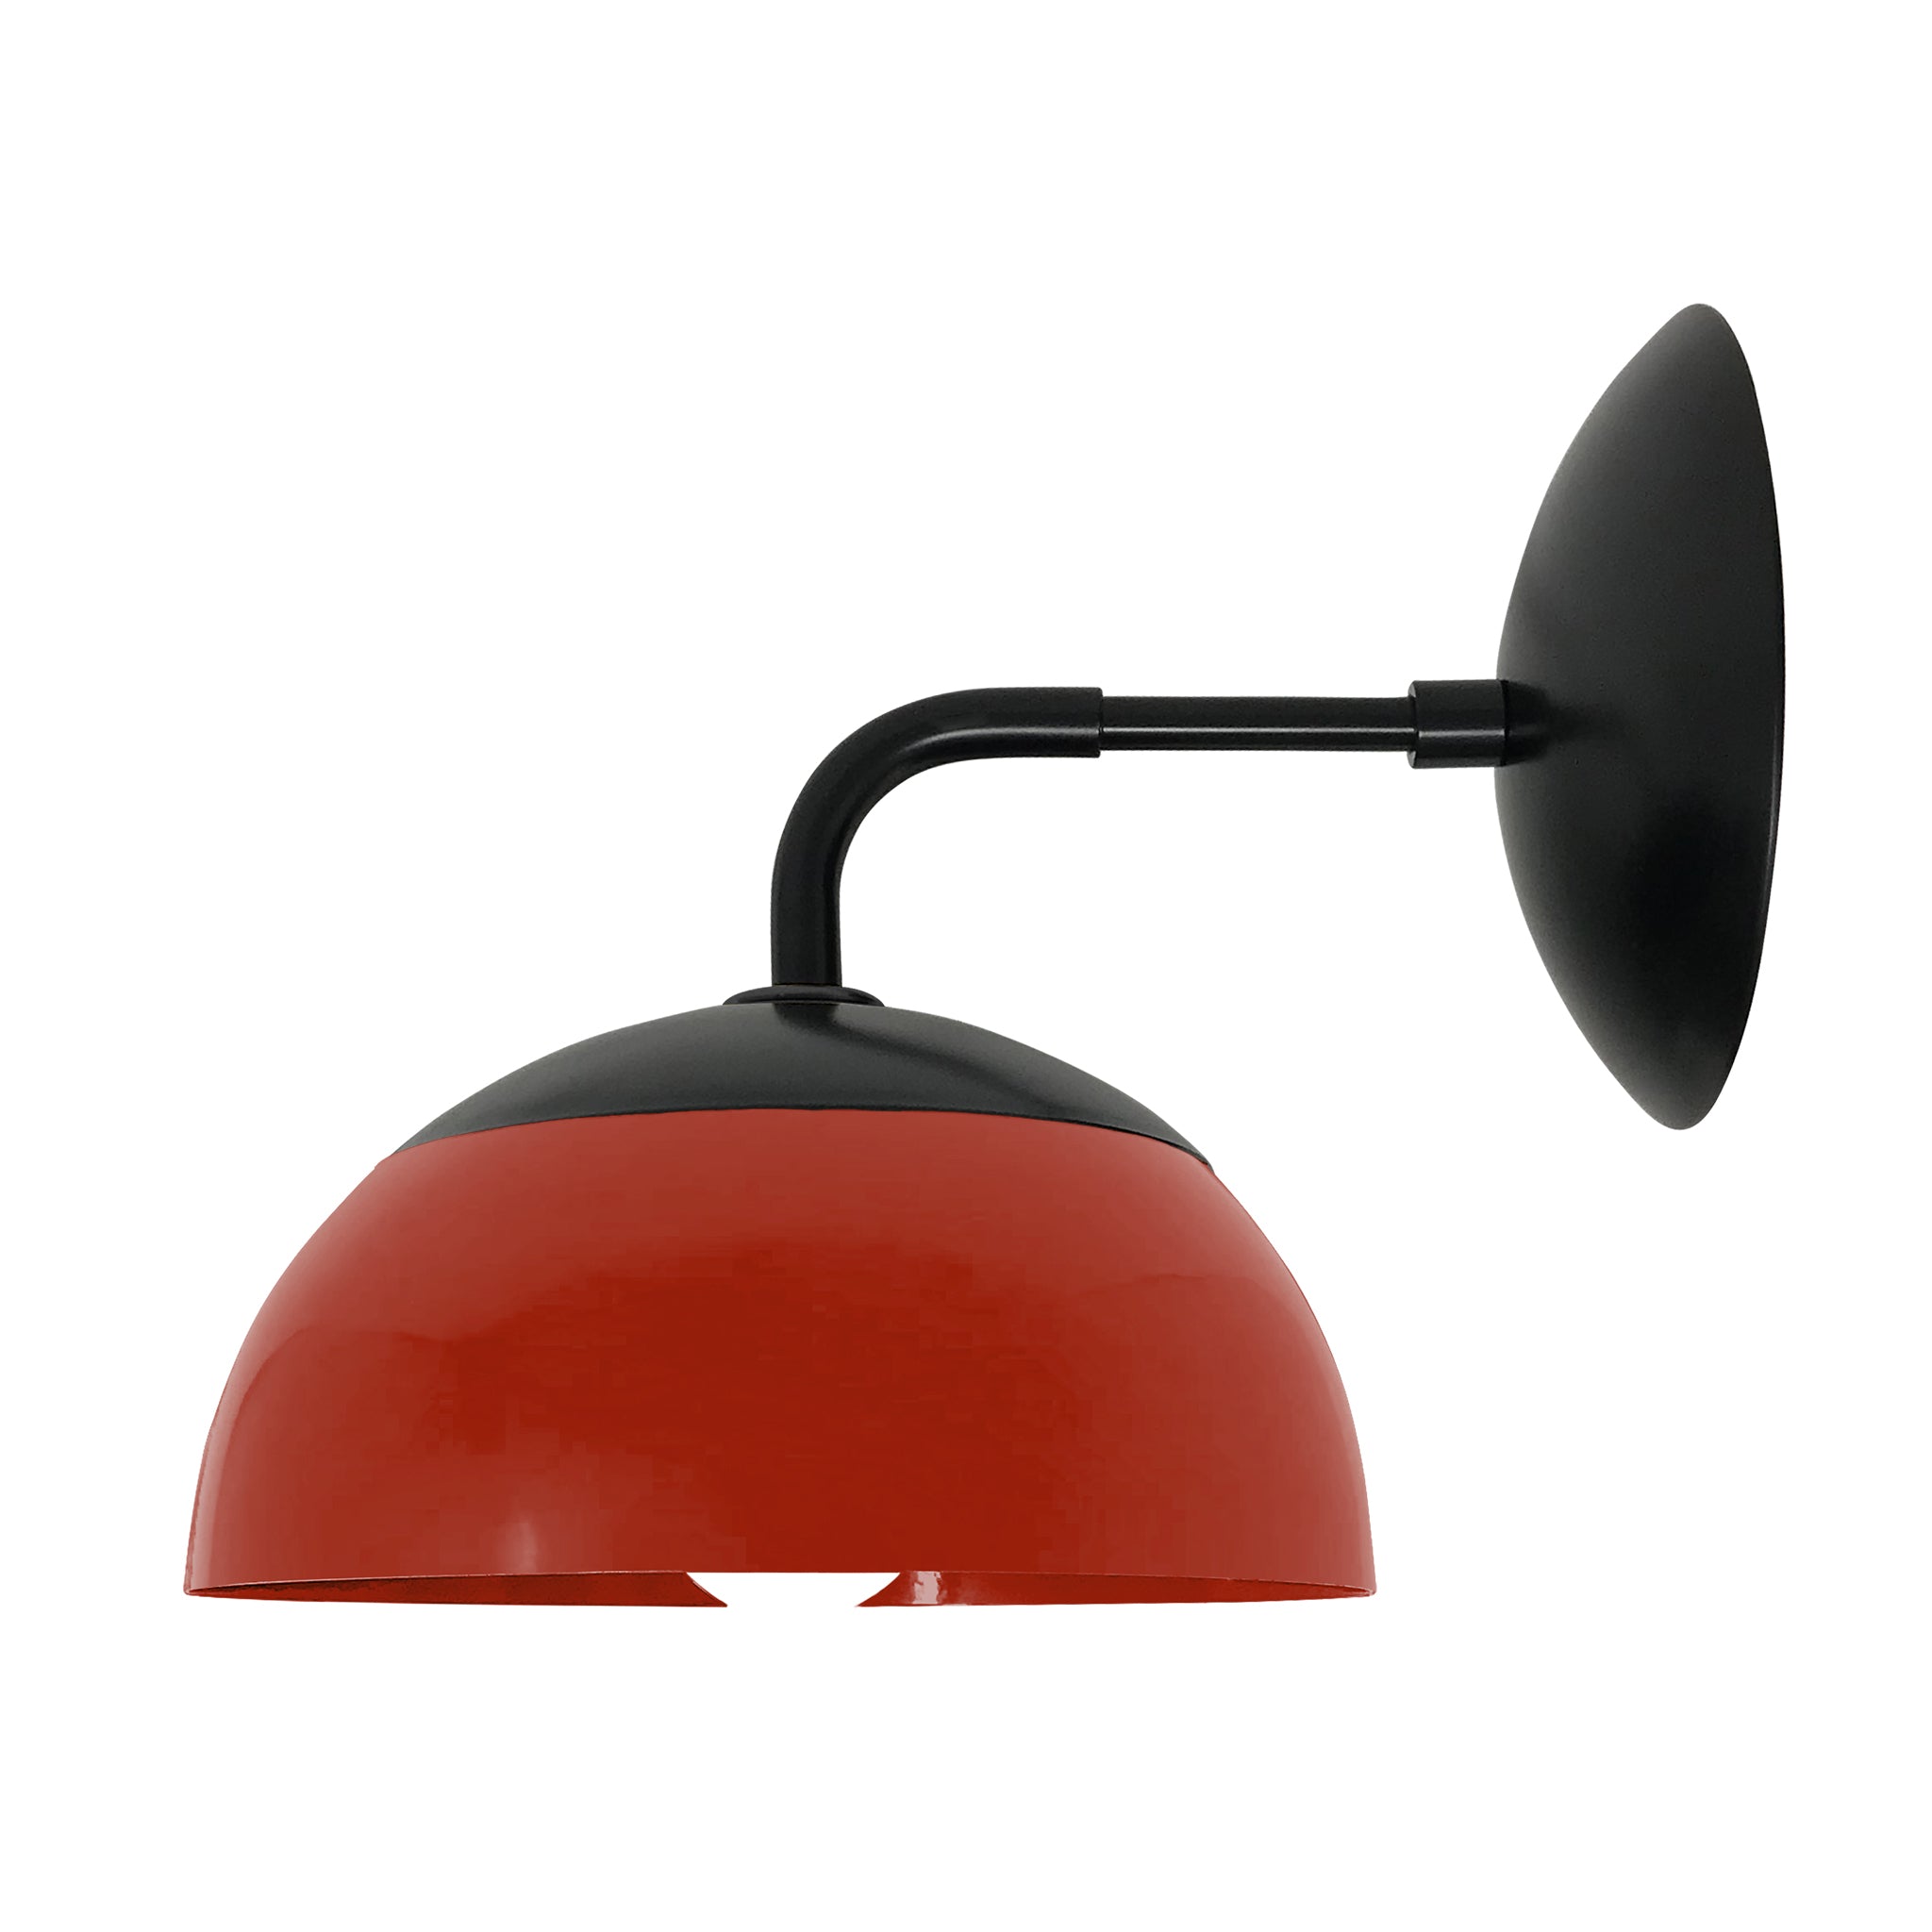 Black and riding hood red color Cadbury sconce 8" Dutton Brown lighting